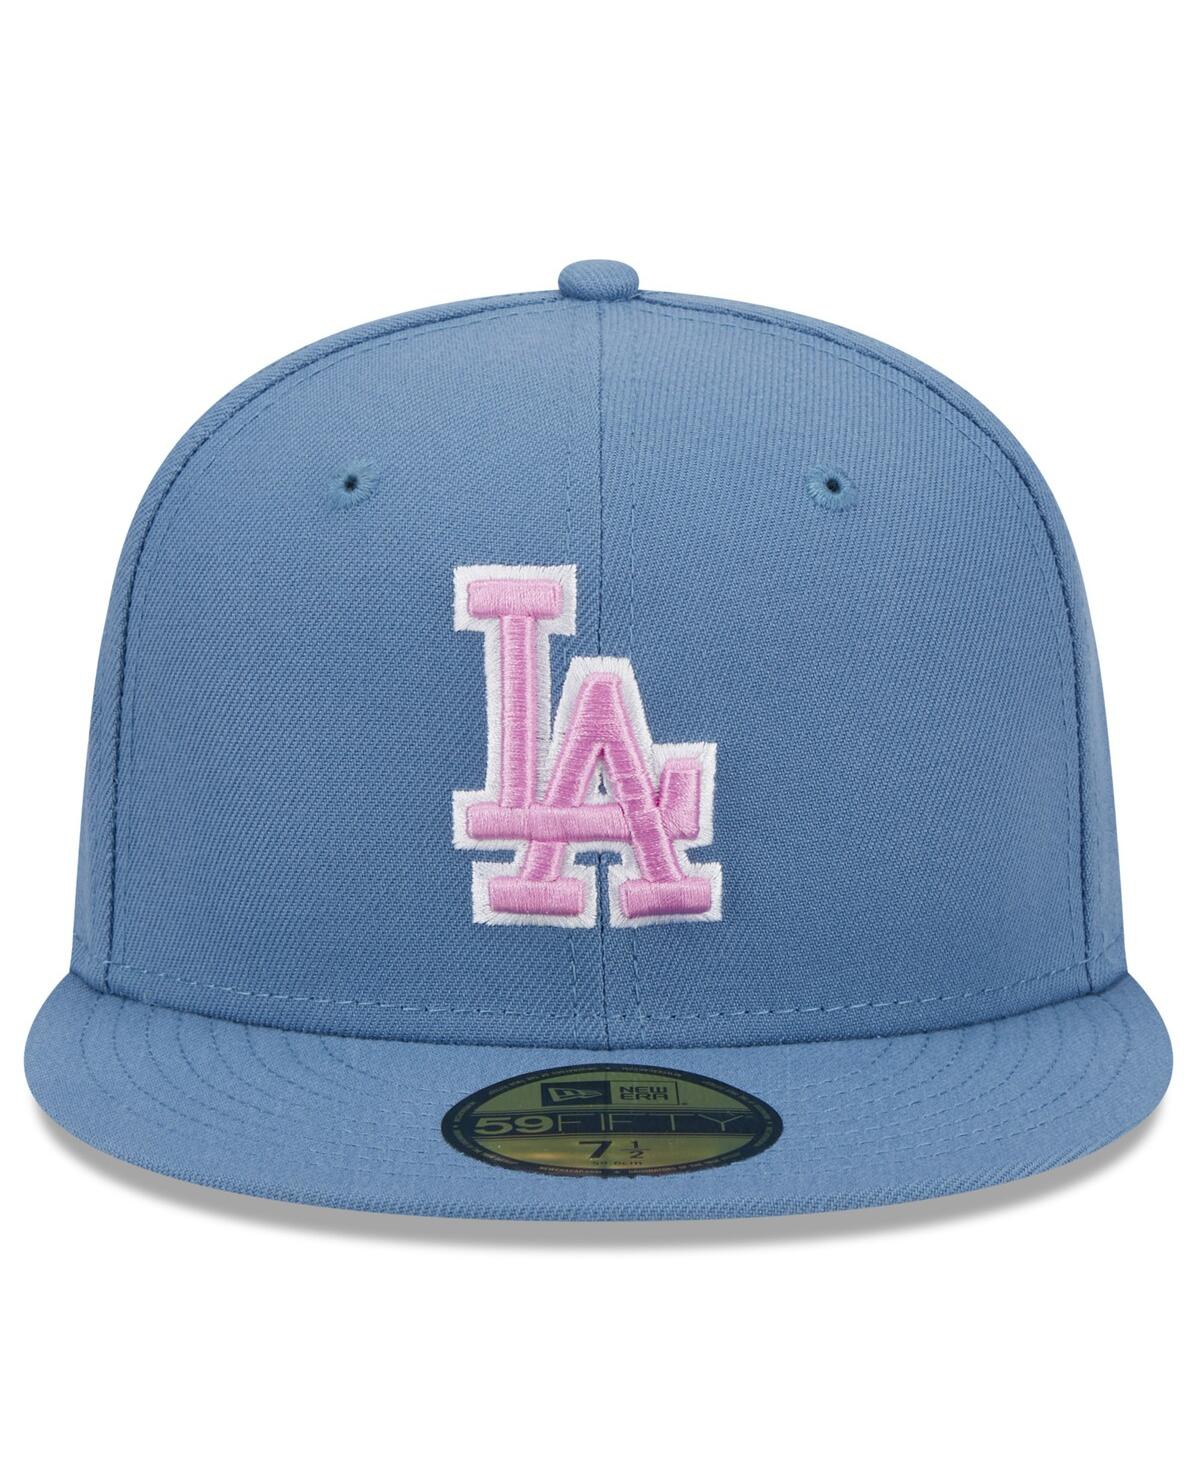 Shop New Era Men's Los Angeles Dodgers Faded Blue Color Pack 59fifty Fitted Hat